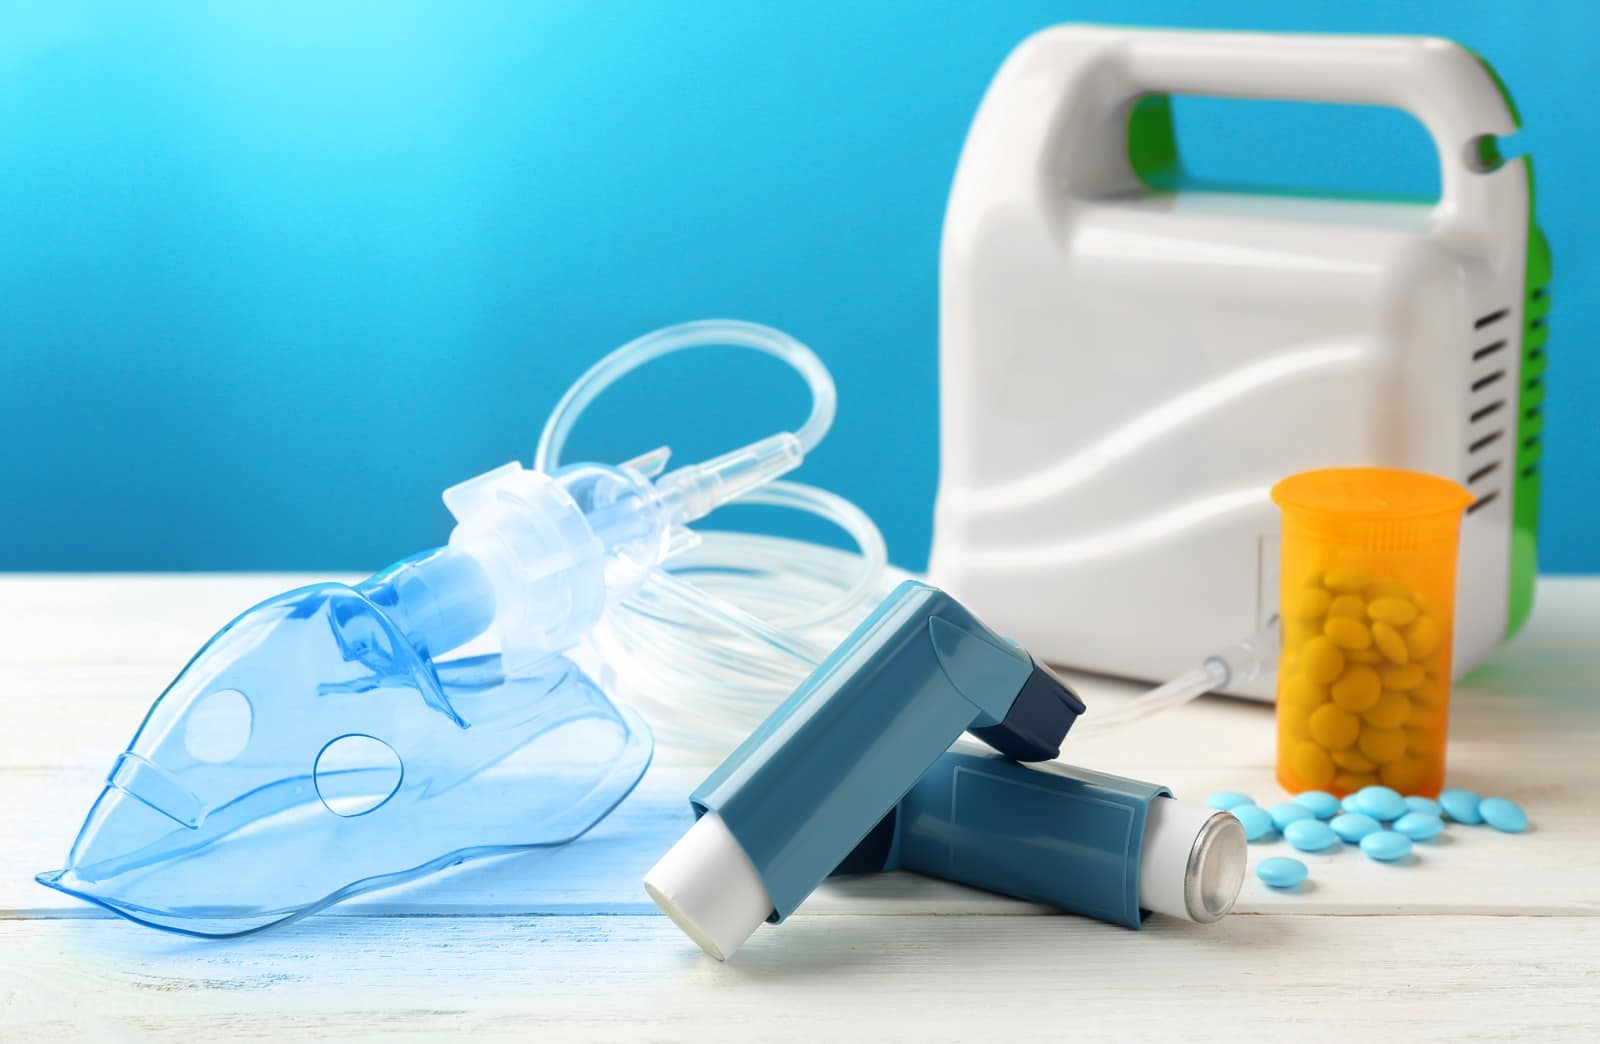 Inhaler vs Nebulizer: Breaking down the differences